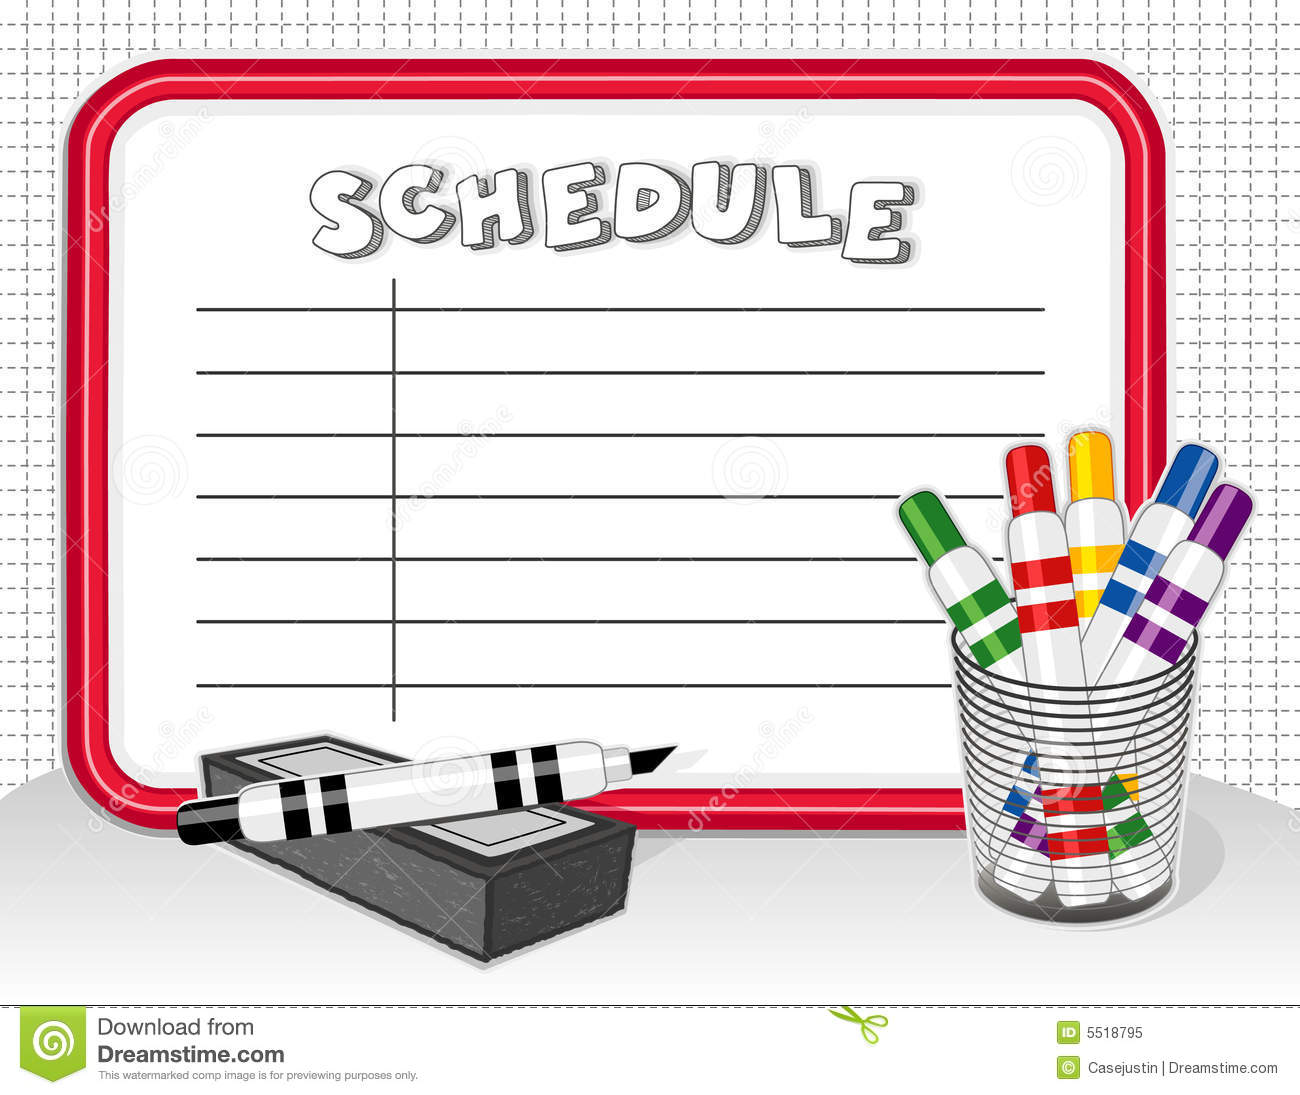 daily schedule check clipart